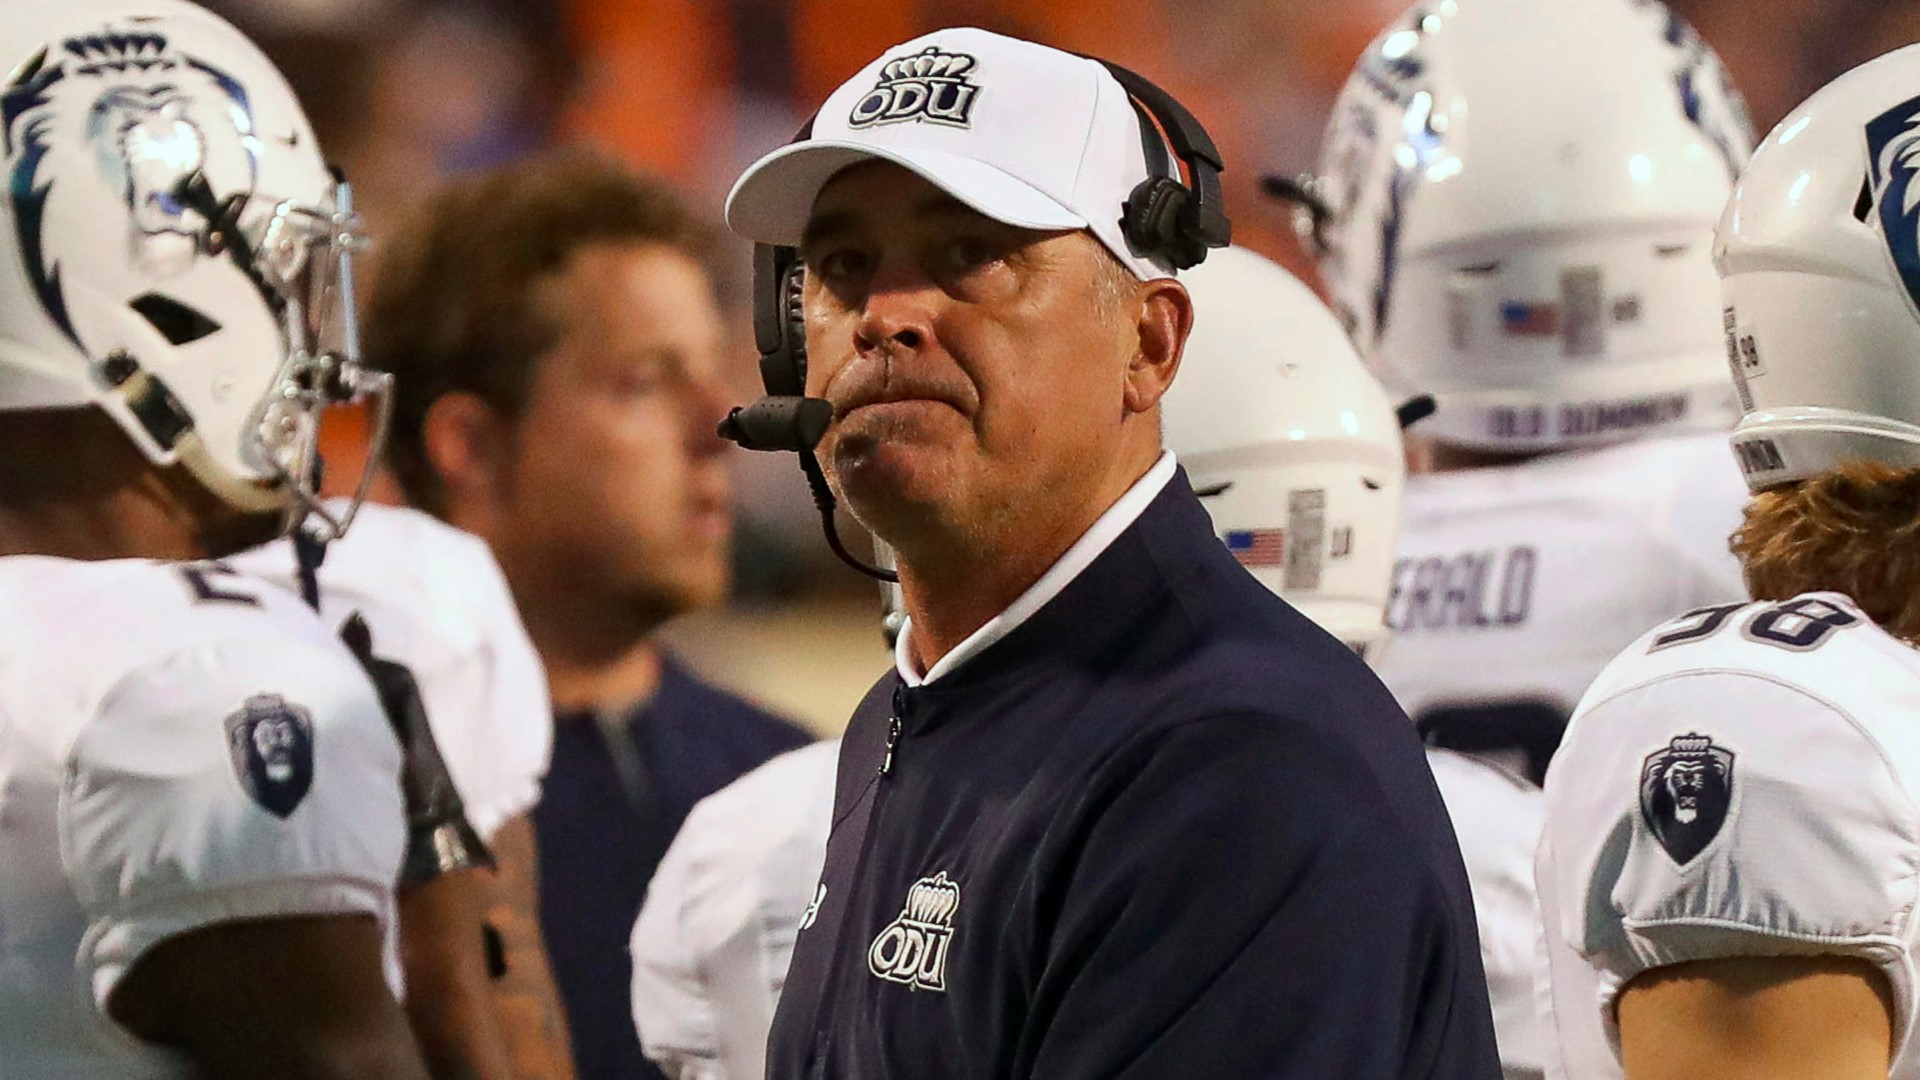 Bobby Wilder built Old Dominion University's football program from scratch. Recent years saw multiple losing seasons. Wilder said he was resigning from his position.